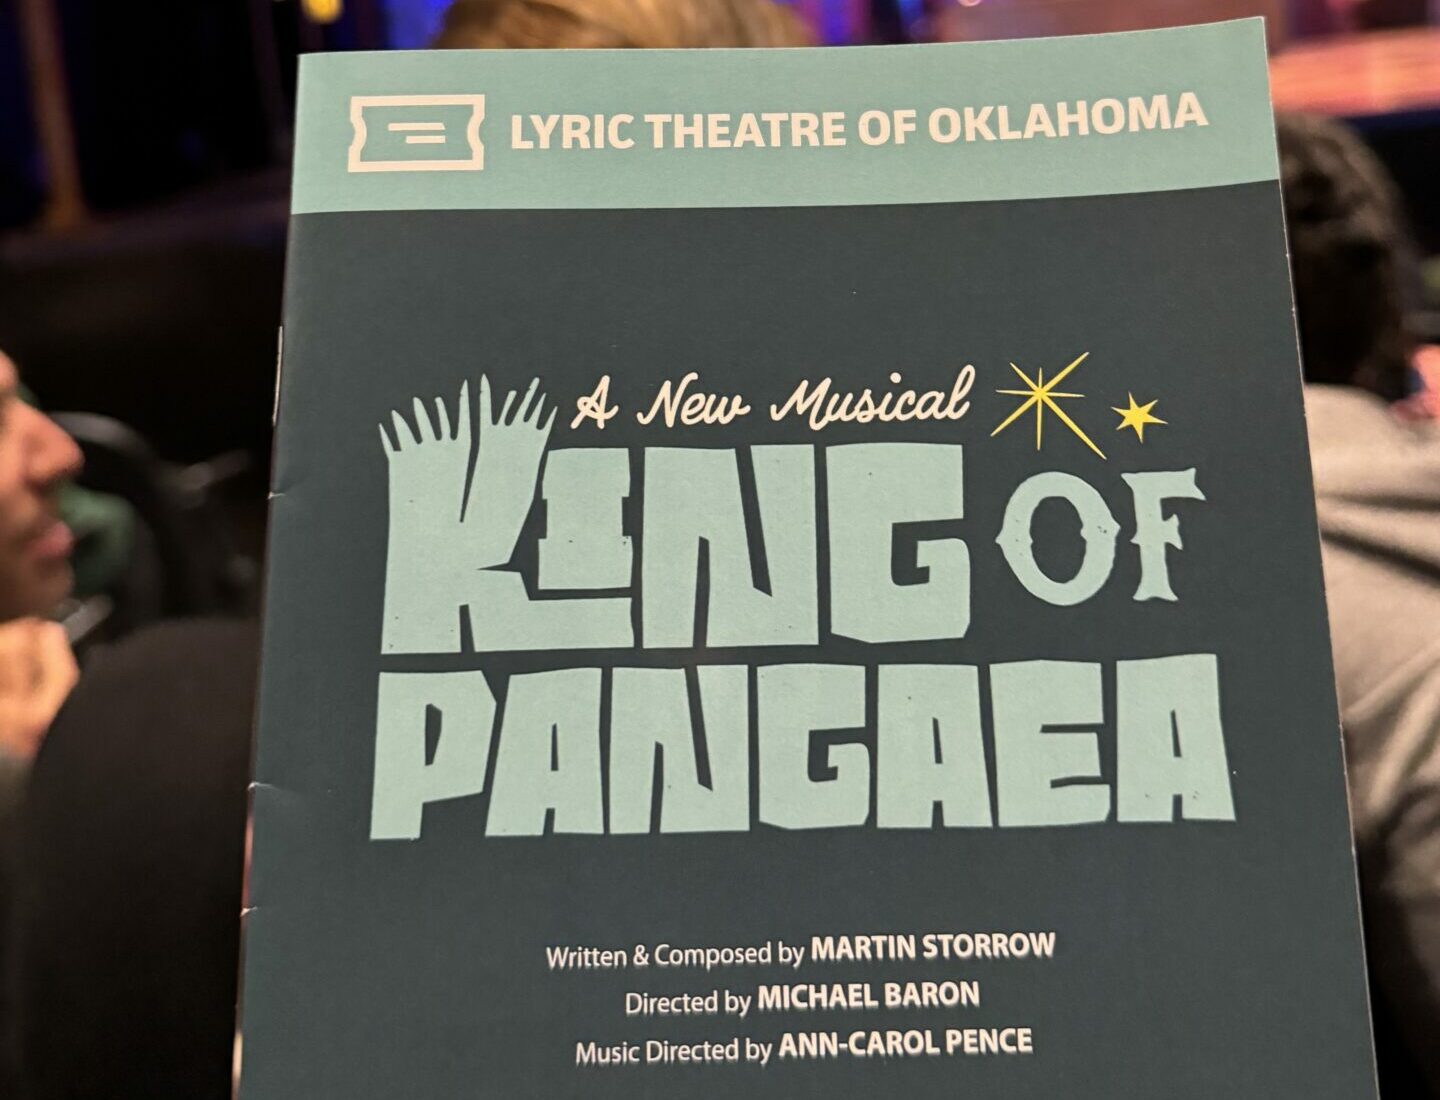 Conference attendees got to see a production of King of Pangaea from our 2022 Festival of New Musicals.